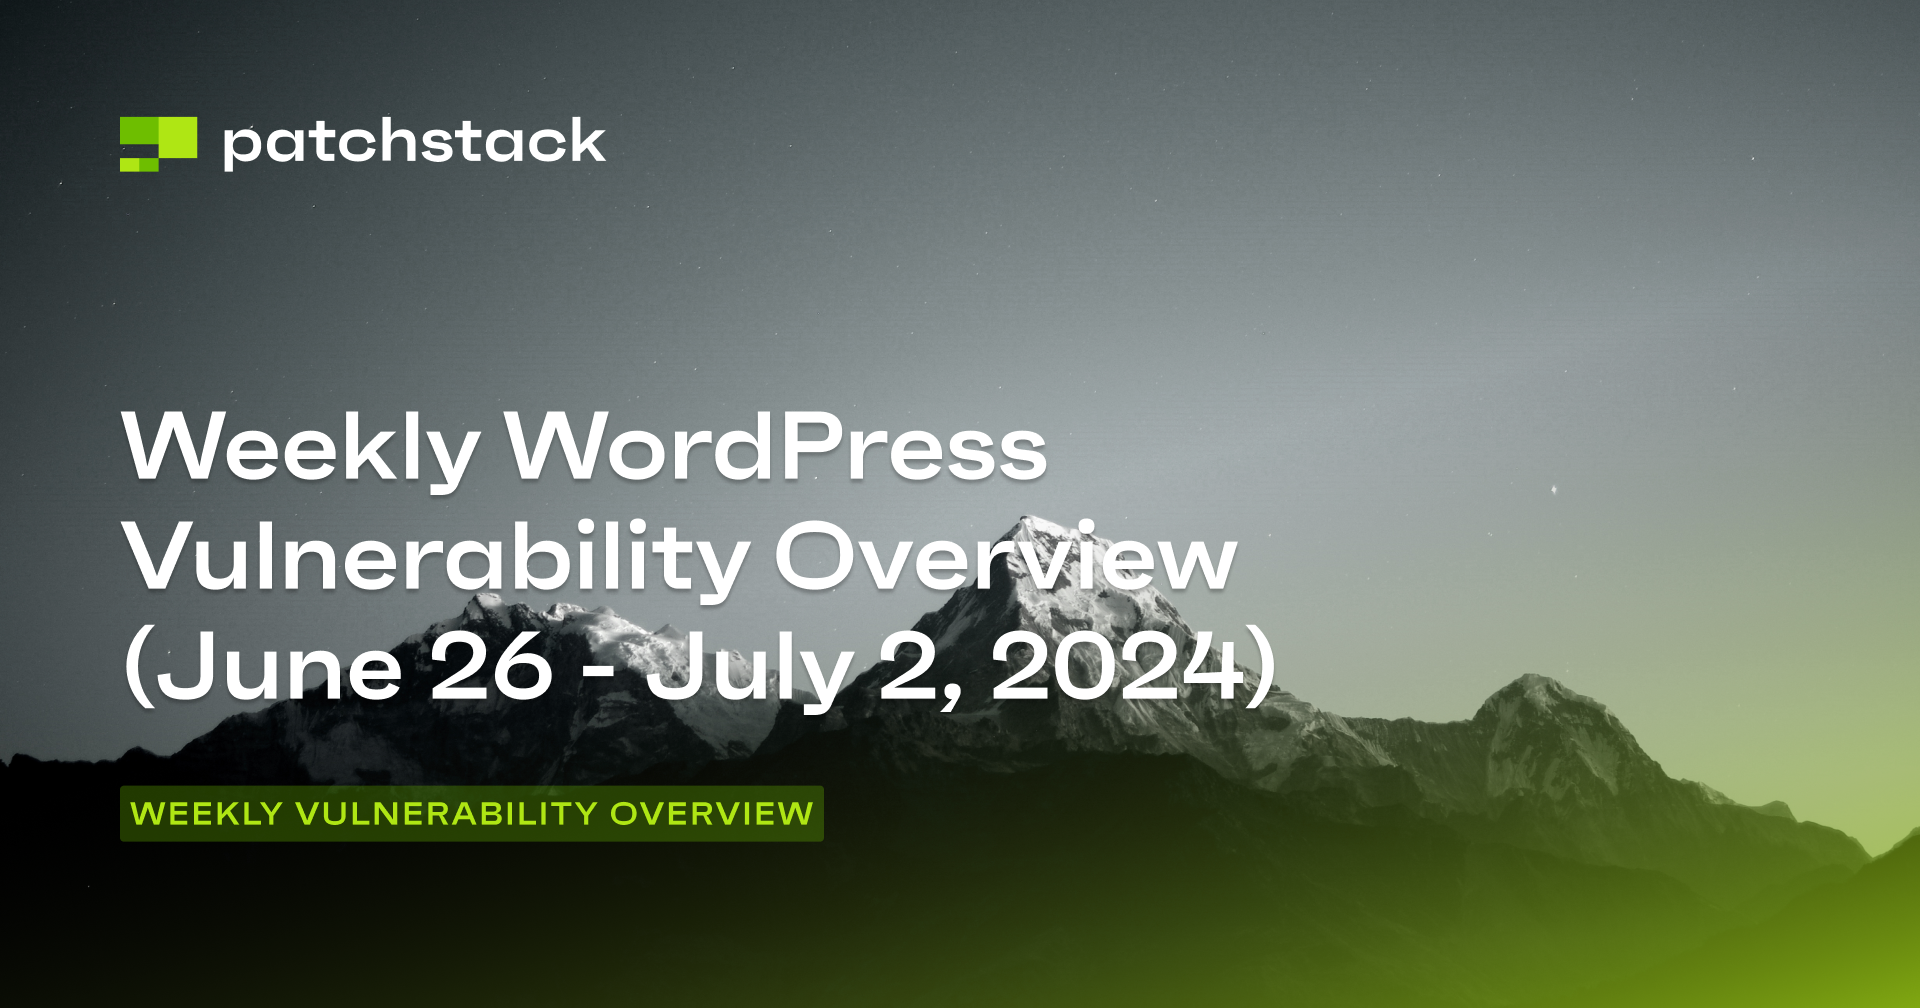 Weekly WordPress Vulnerability Overview June 26 - July 2 - 2024 - Patchstack news